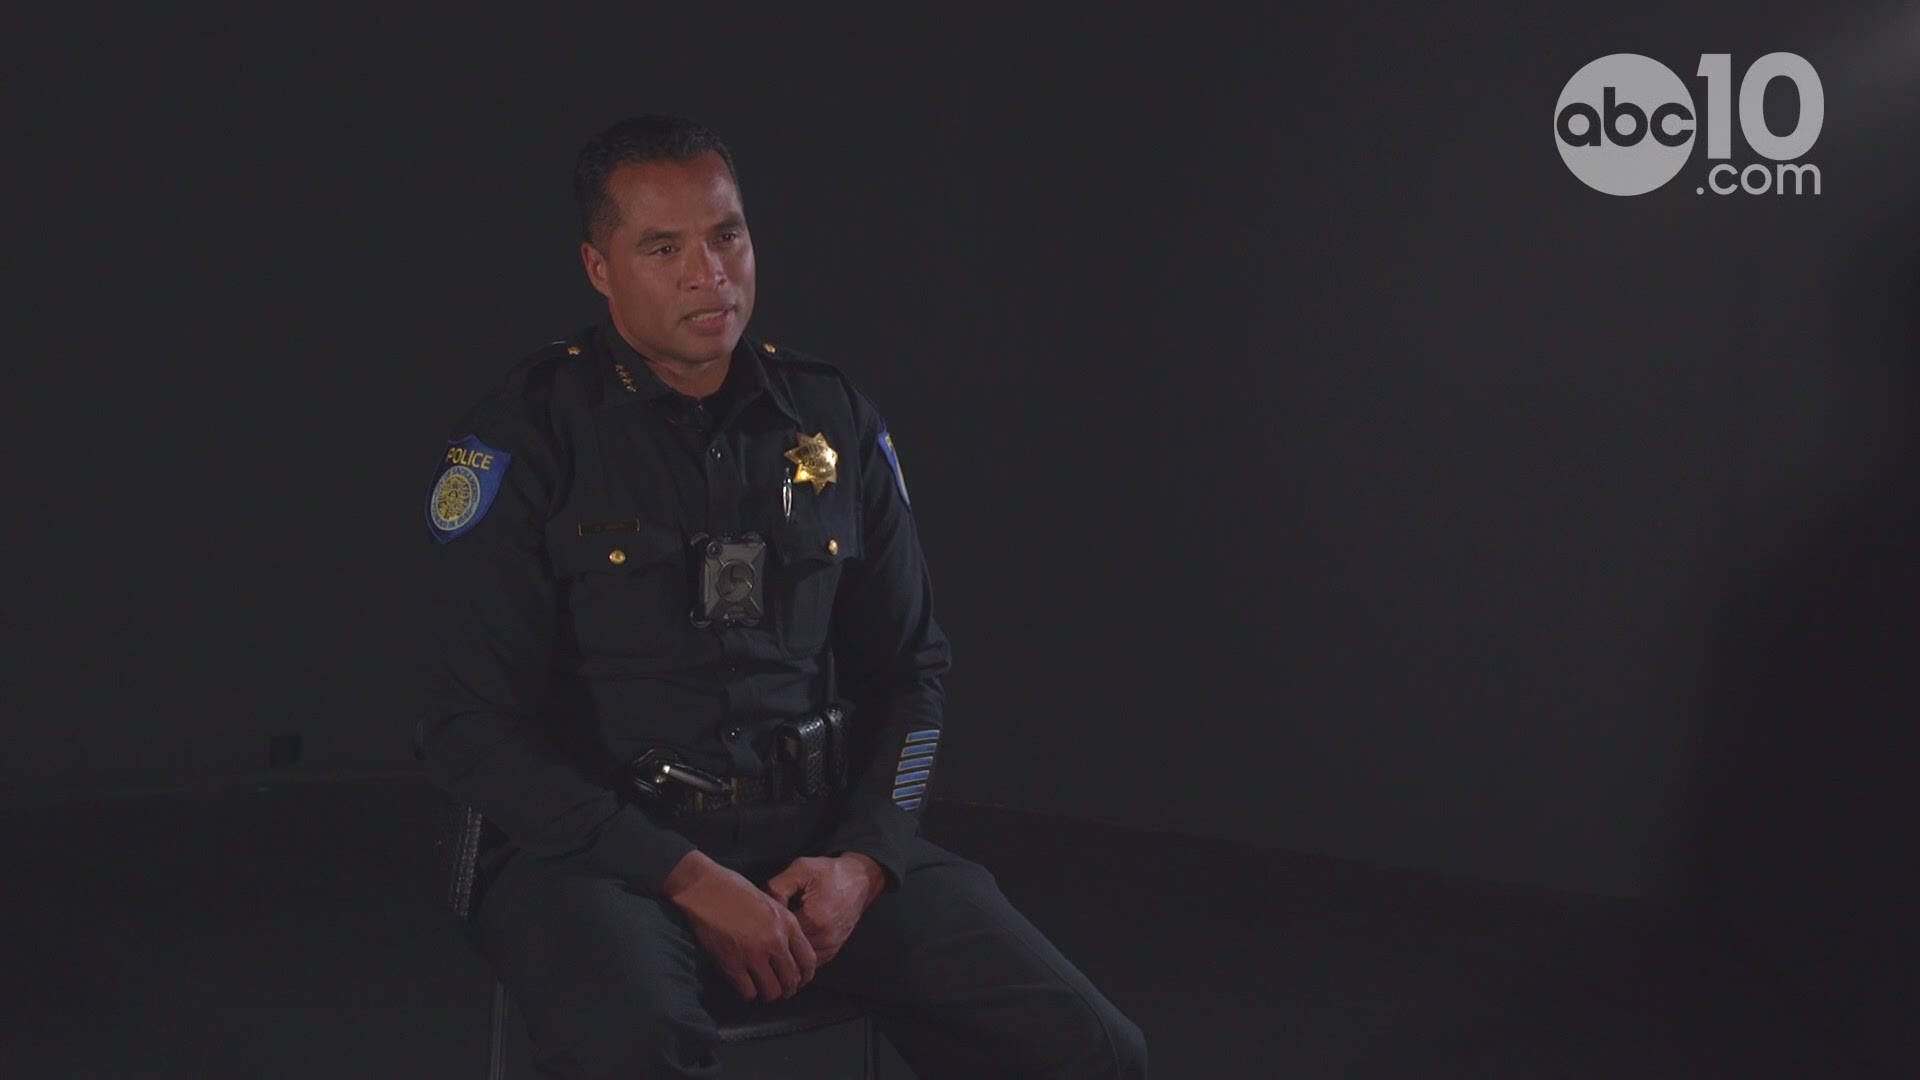 Sacramento police Chief Daniel Hahn said the departments commitment is to follow the facts and be transparent with the community. He pledges to make corrections where corrections are needed after Monday protests resulted in 84 arrests.